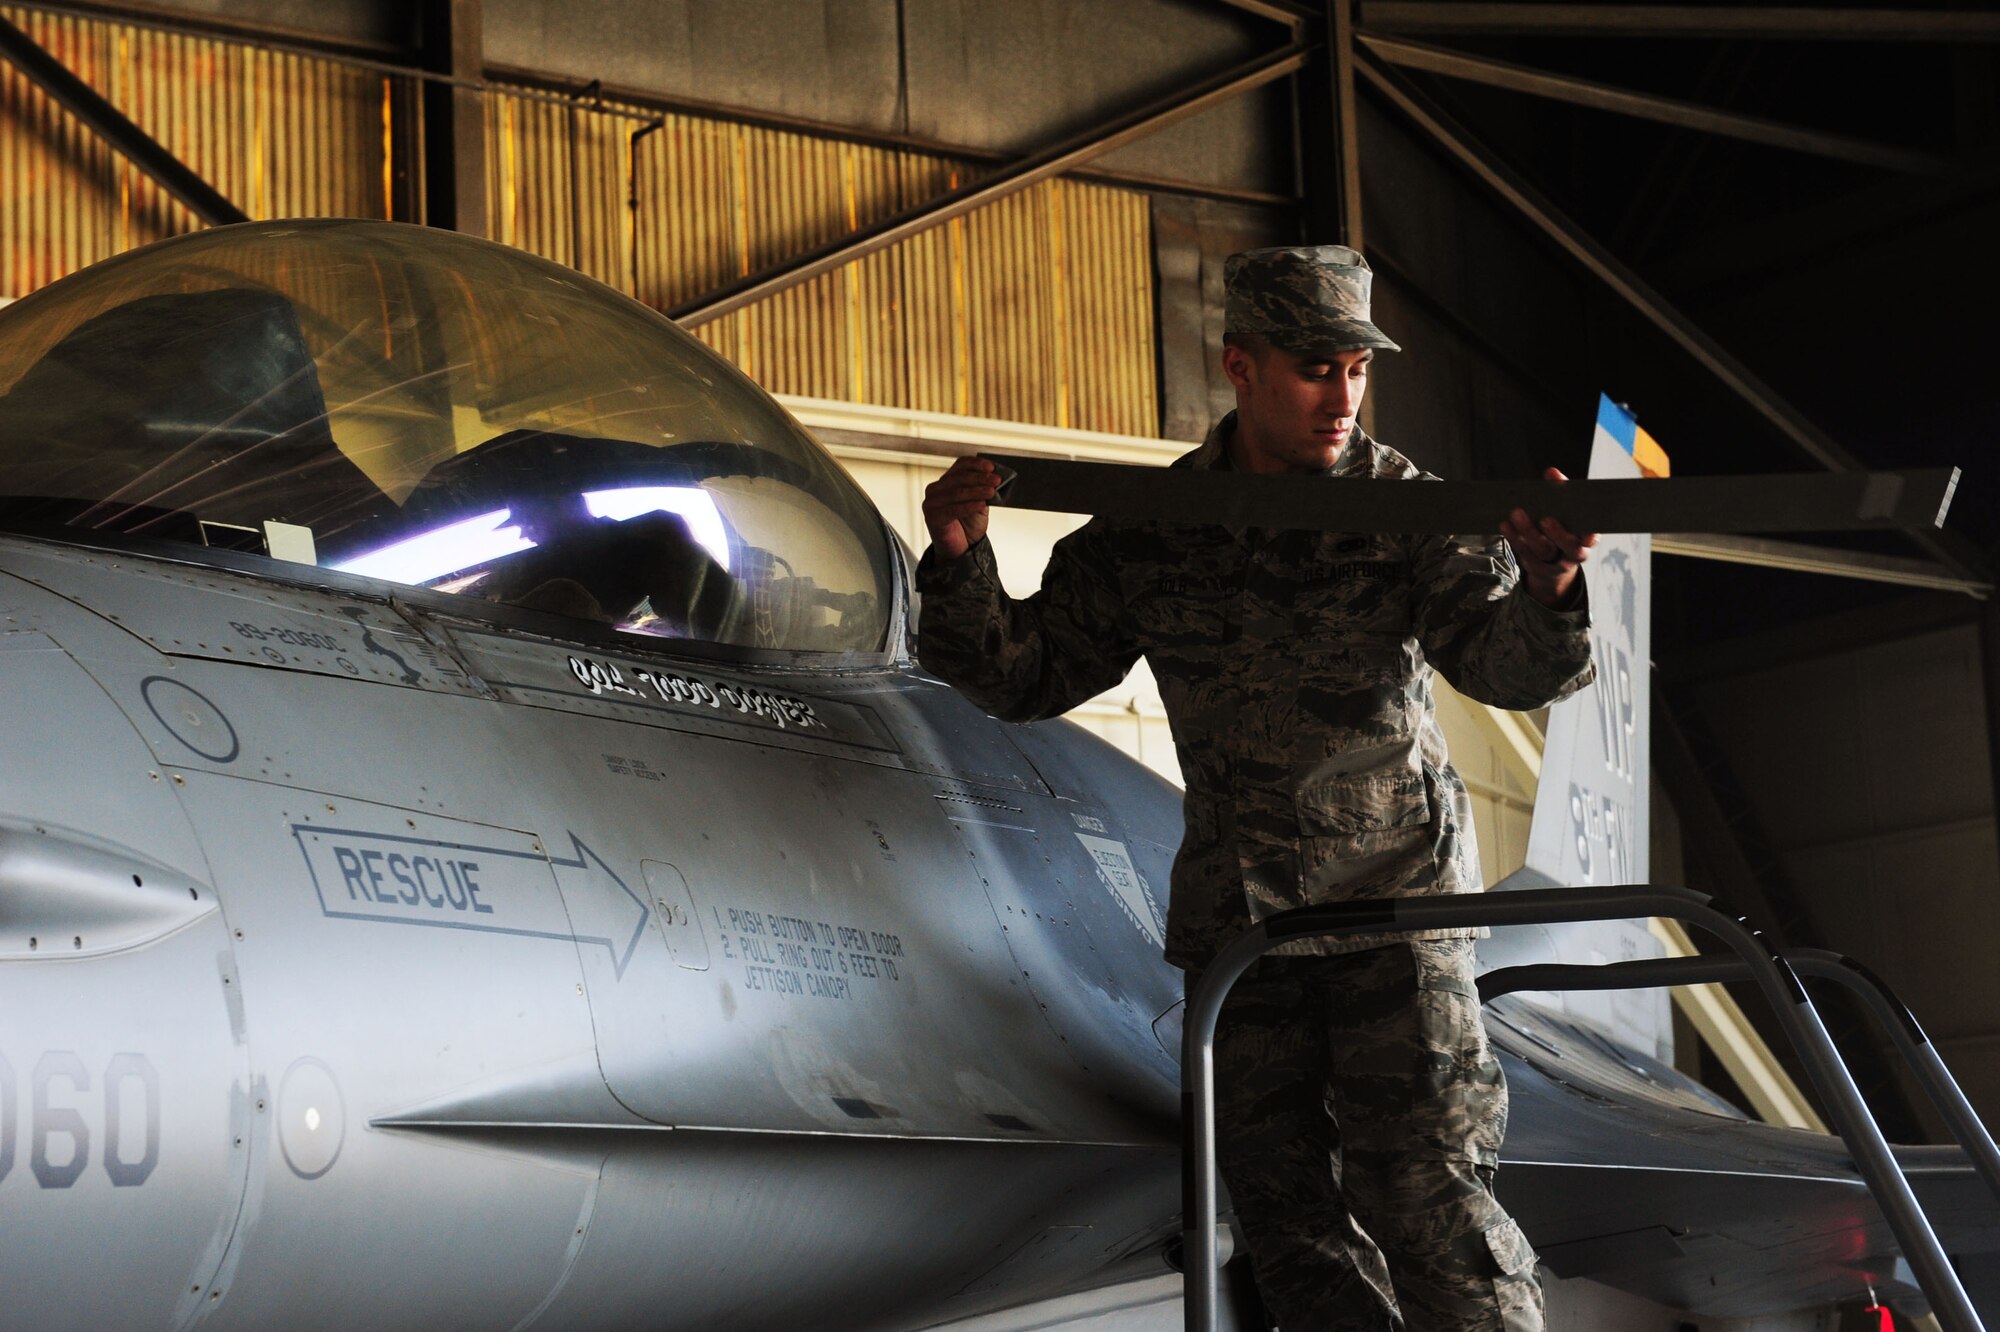 Airman 1st Class Jonathan Kolb, 35th Aircraft Maintenance Unit assistant dedicated crew chief, changes the name on the 8th Fighter Wing’s flagship aircraft to the new wing commander, Col. Todd Dozier, May 20, 2016 at Kunsan Air Base, Republic of Korea. (U.S. Air Force photo by Senior Airman Ashley L. Gardner/Released)